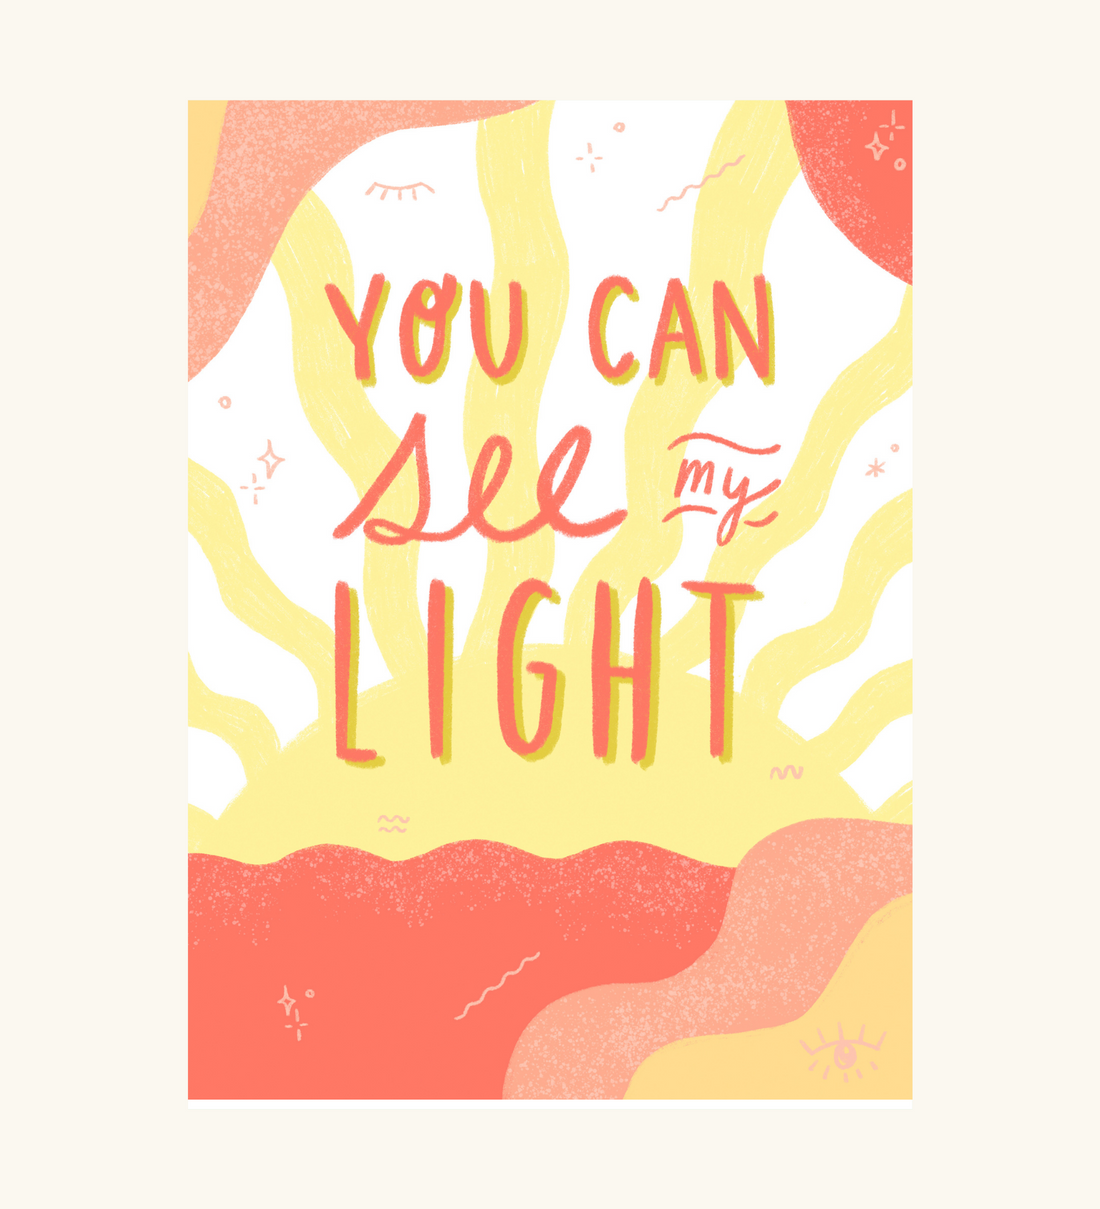 You Can See My Light | Digital Print